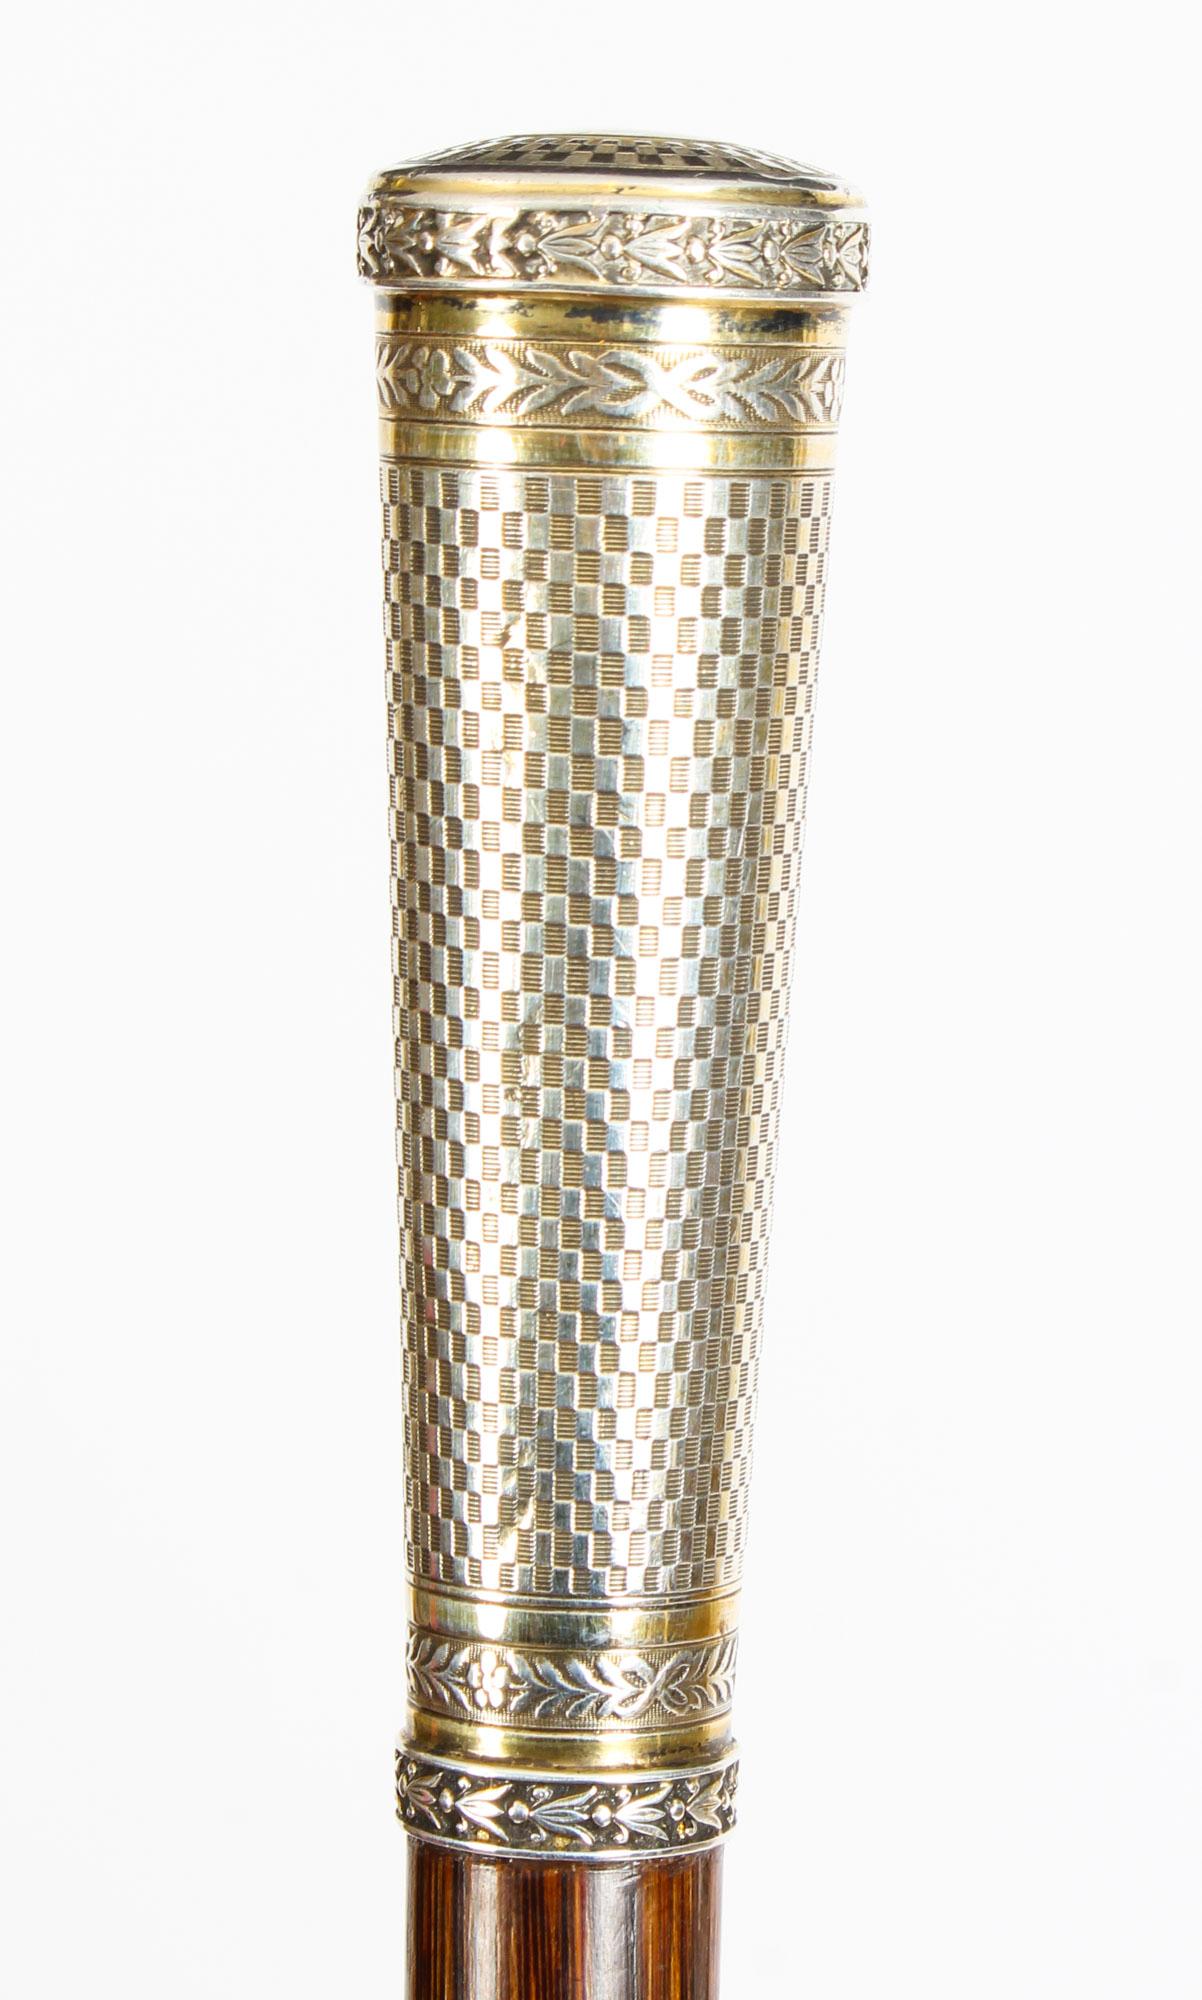 This is a superb antique French Belle Époque silver-mounted bamboo walking stick, with hallmarks for 1900.

This decorative walking cane features a splendid tapering cylinder handle chased with neoclassical leafy friezes between engine-turned